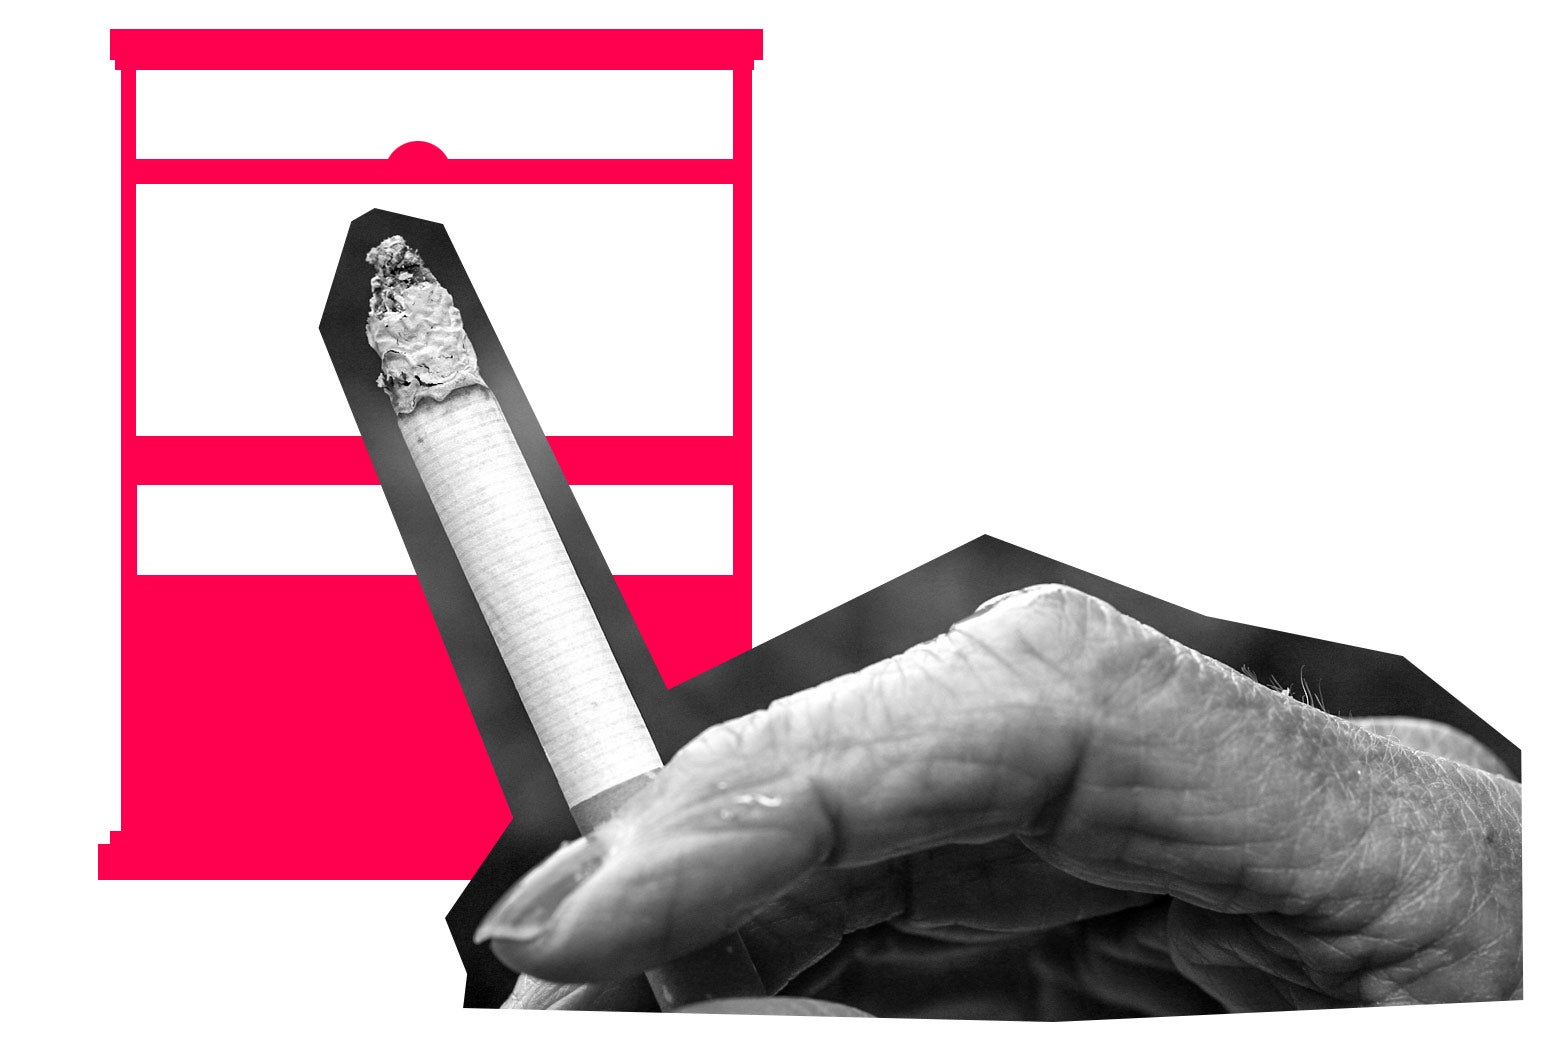 Photo of a hand holding a cigarette overlaid on a graphic of an open window